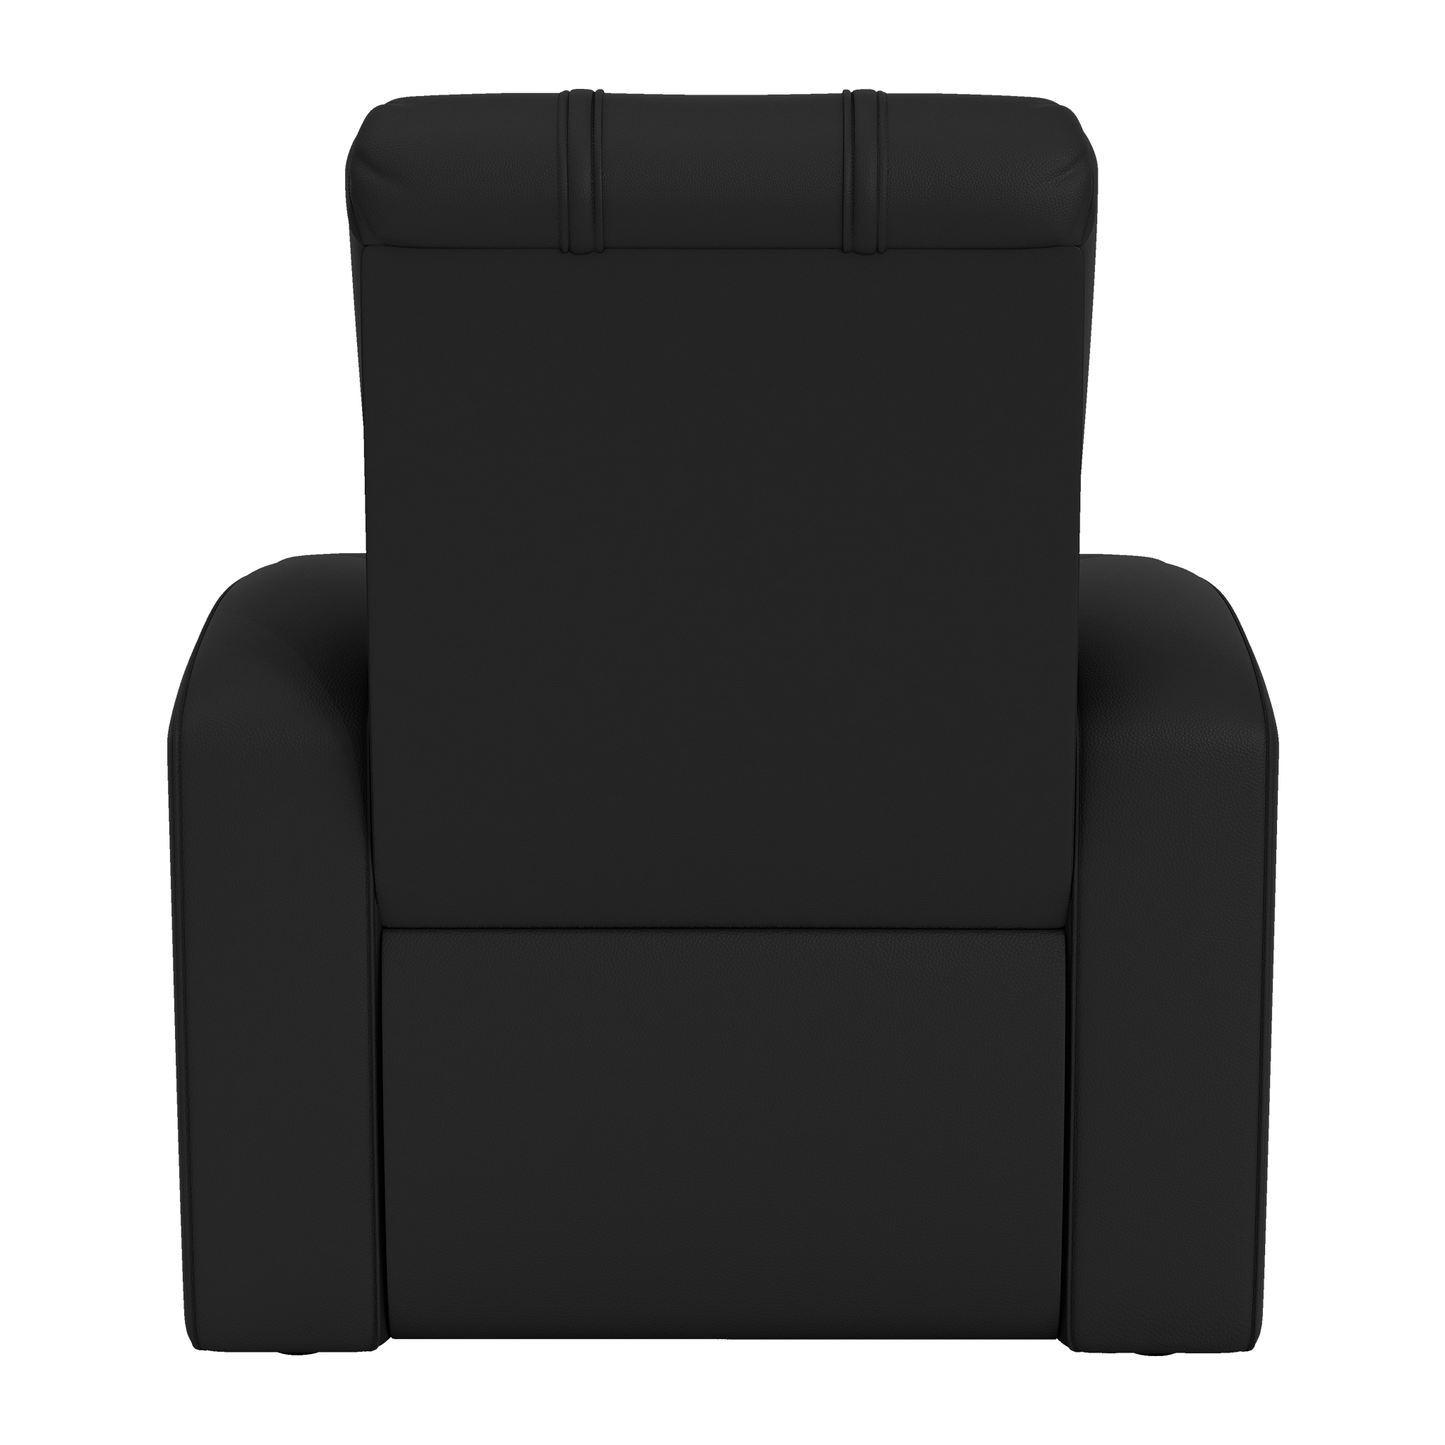 Relax Home Theater Recliner with Portland Timbers Wordmark Logo